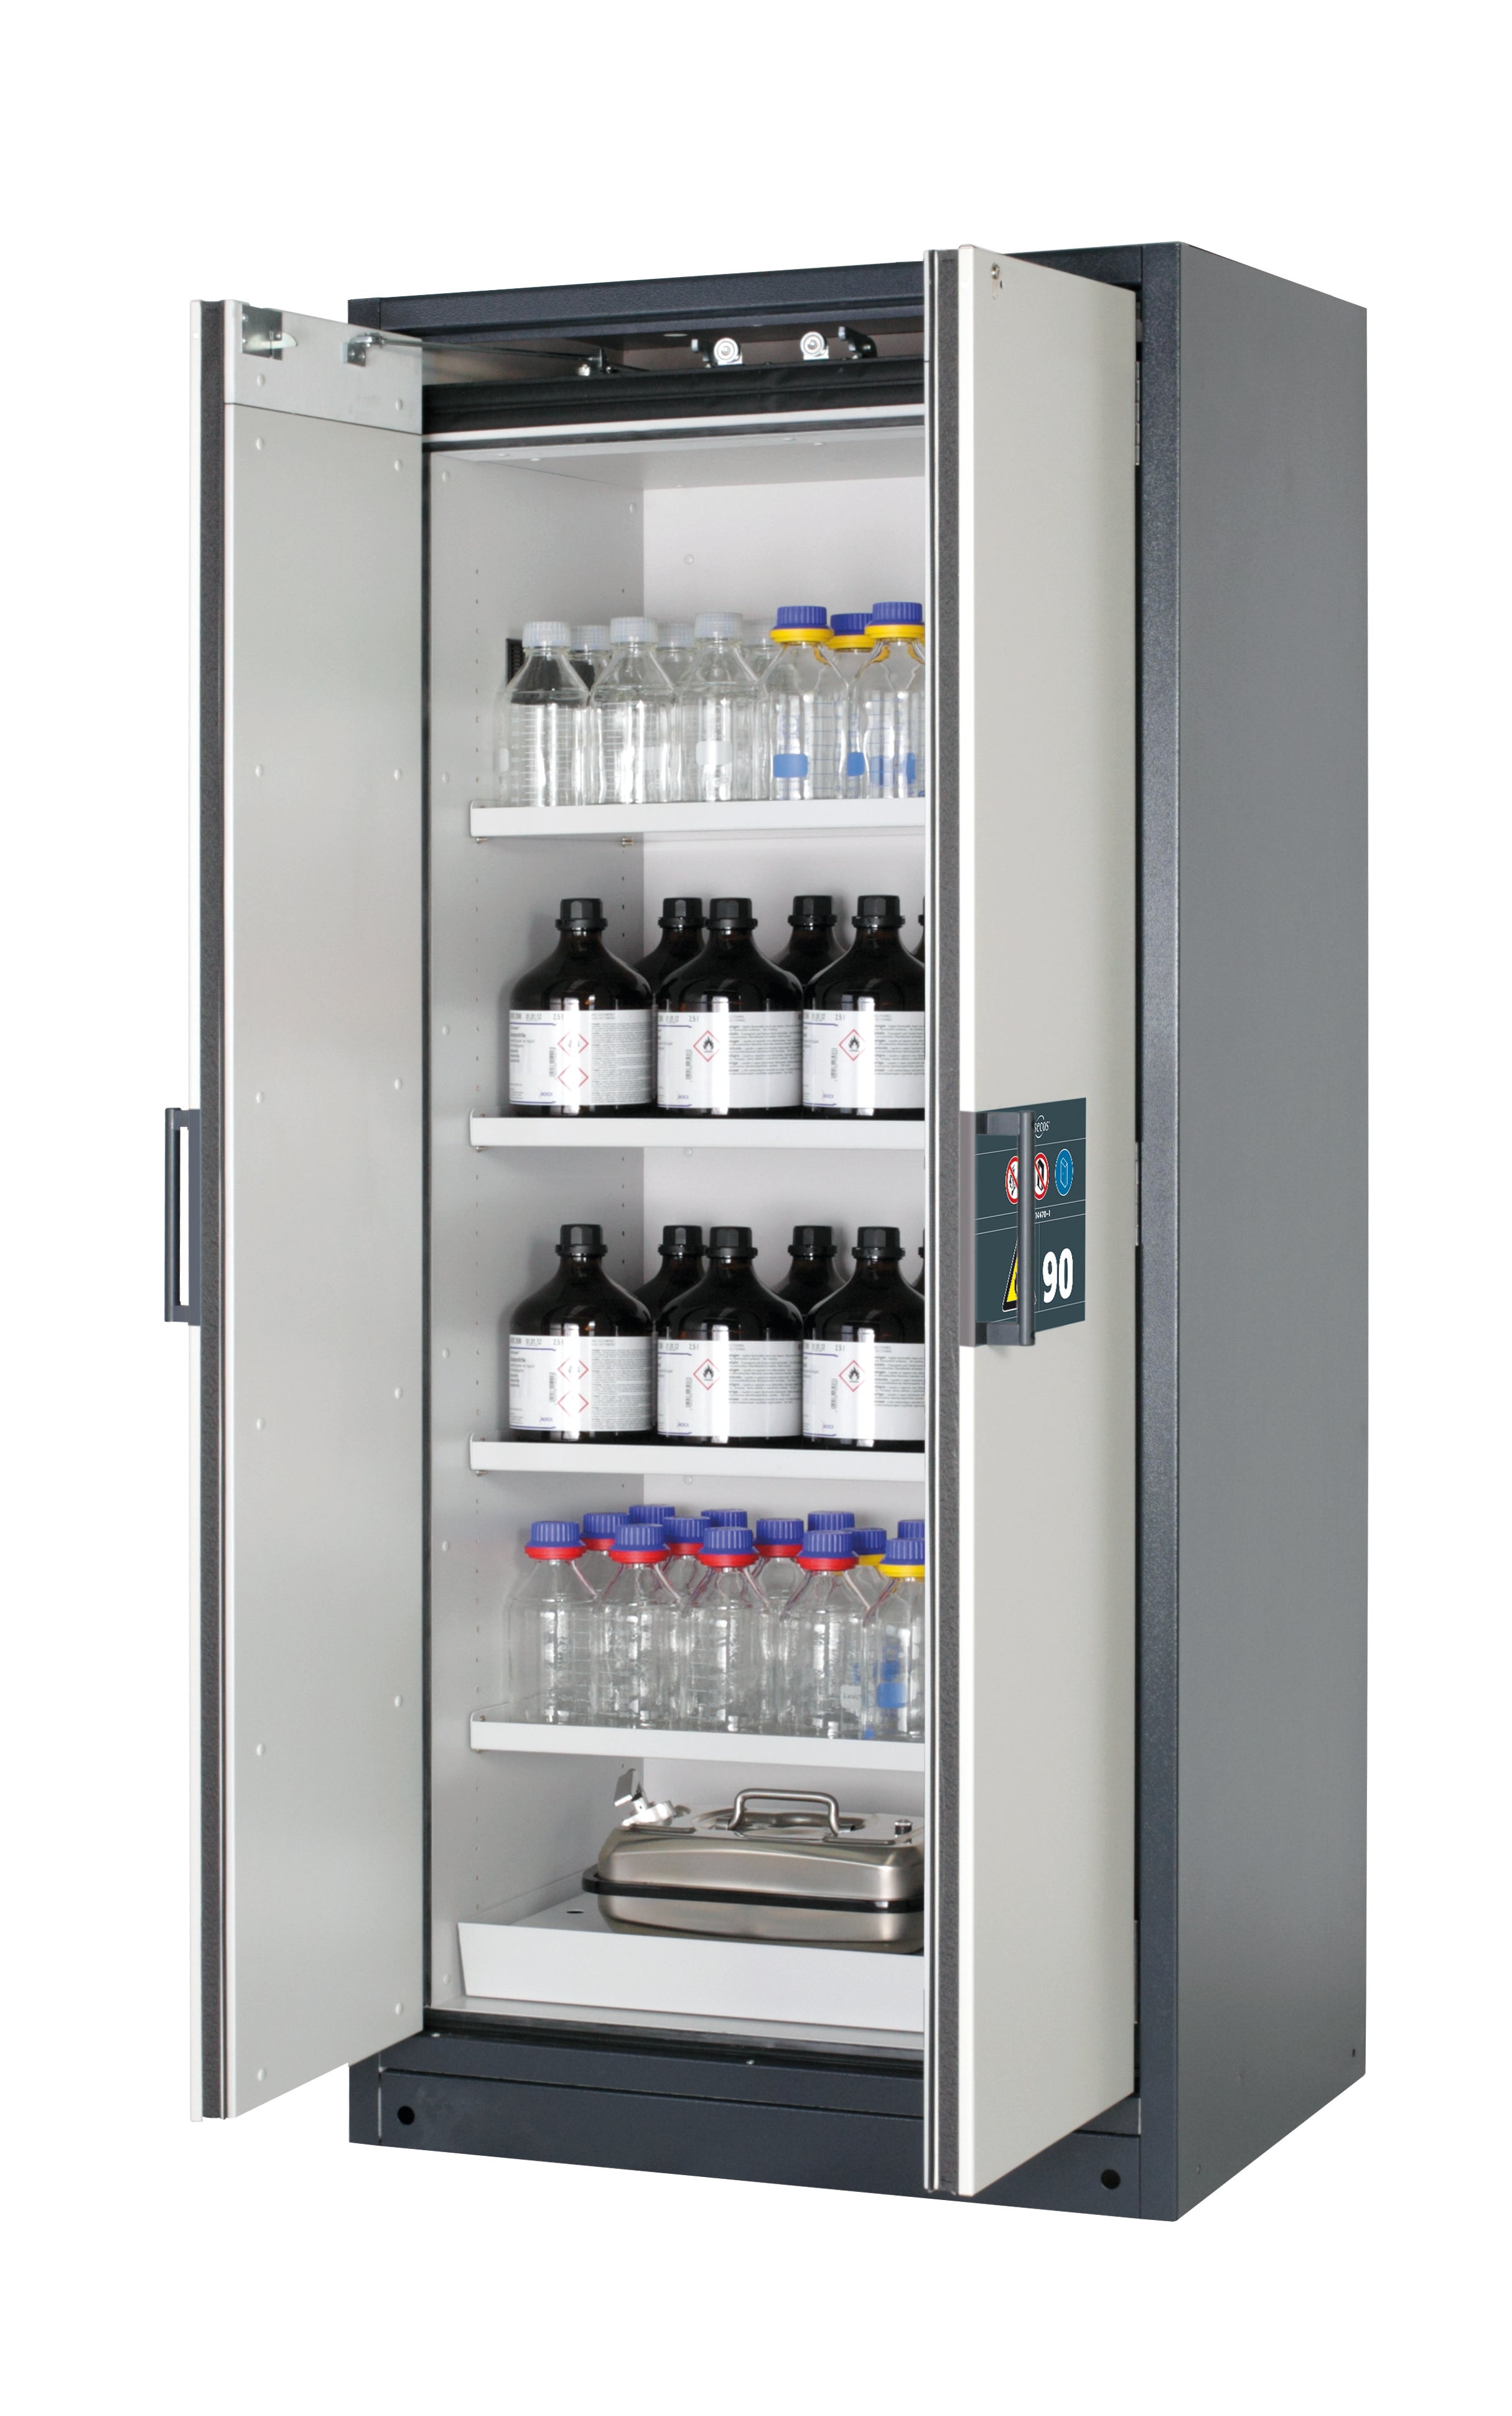 Type 90 safety storage cabinet Q-CLASSIC-90 model Q90.195.090 in light grey RAL 7035 with 4x shelf standard (sheet steel),